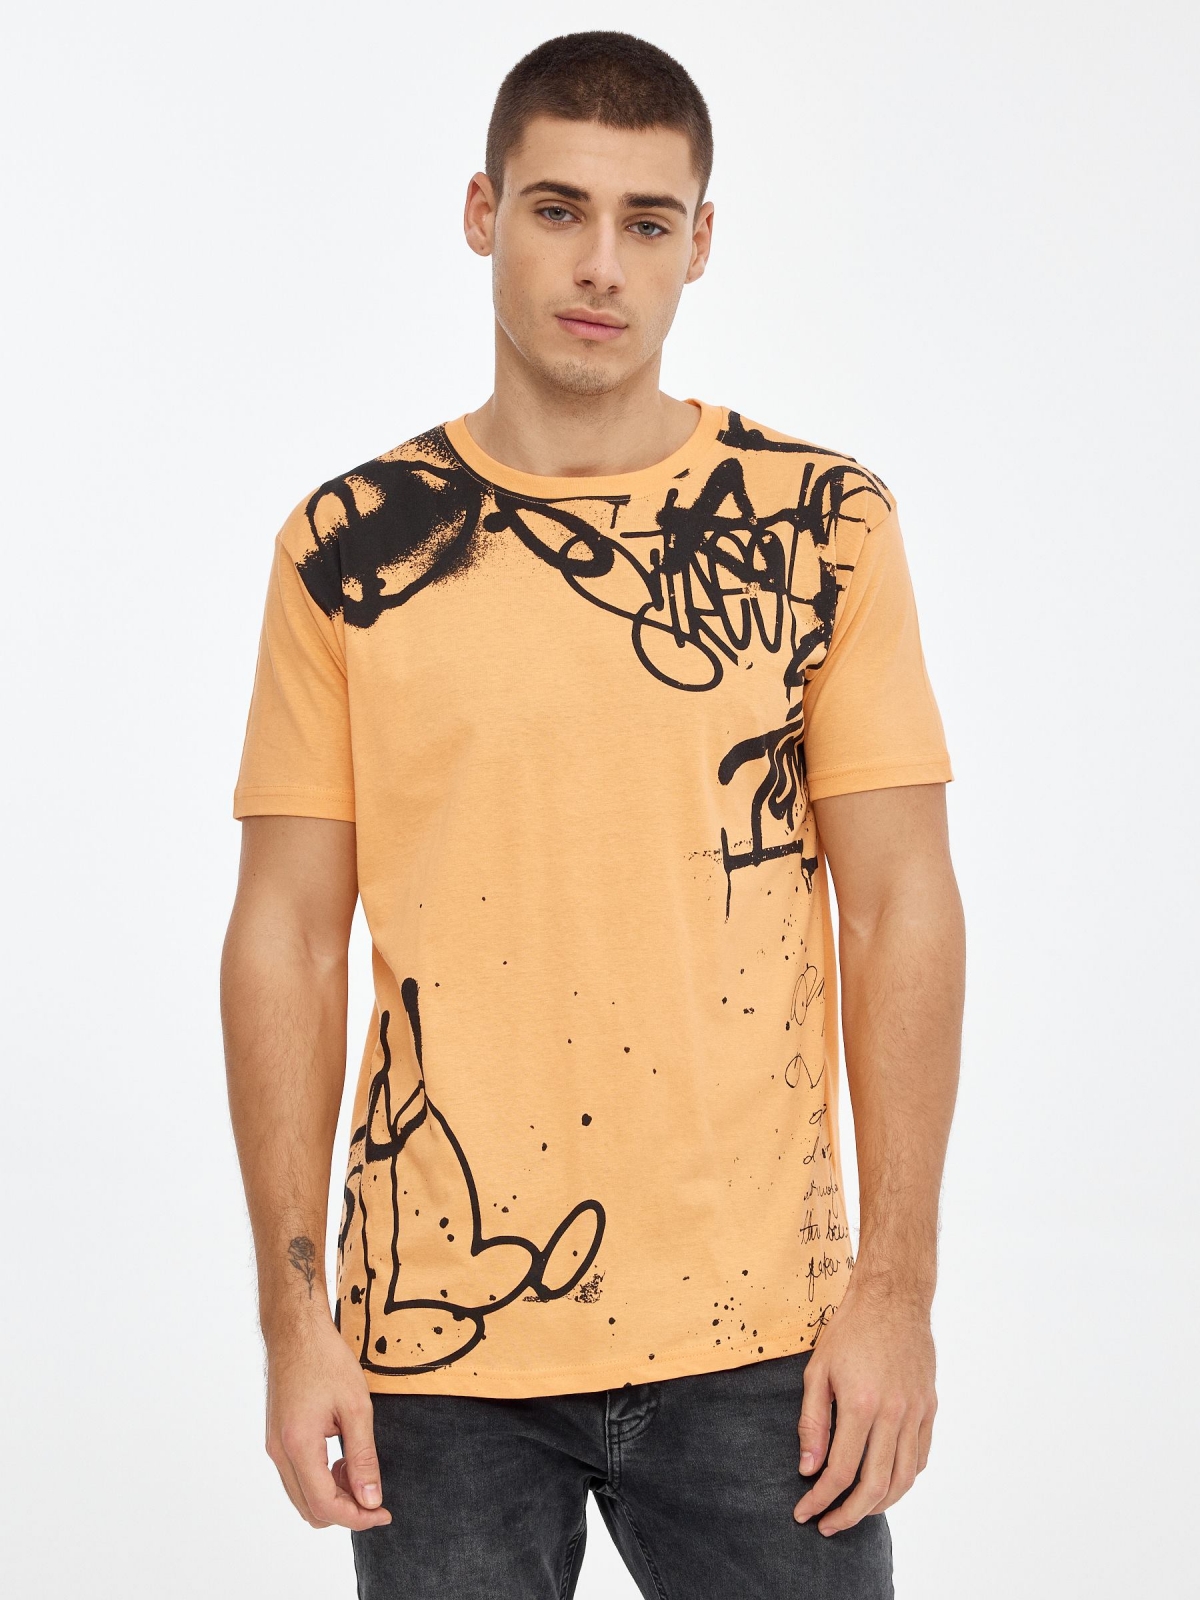 Graffiti printed t-shirt salmon middle front view